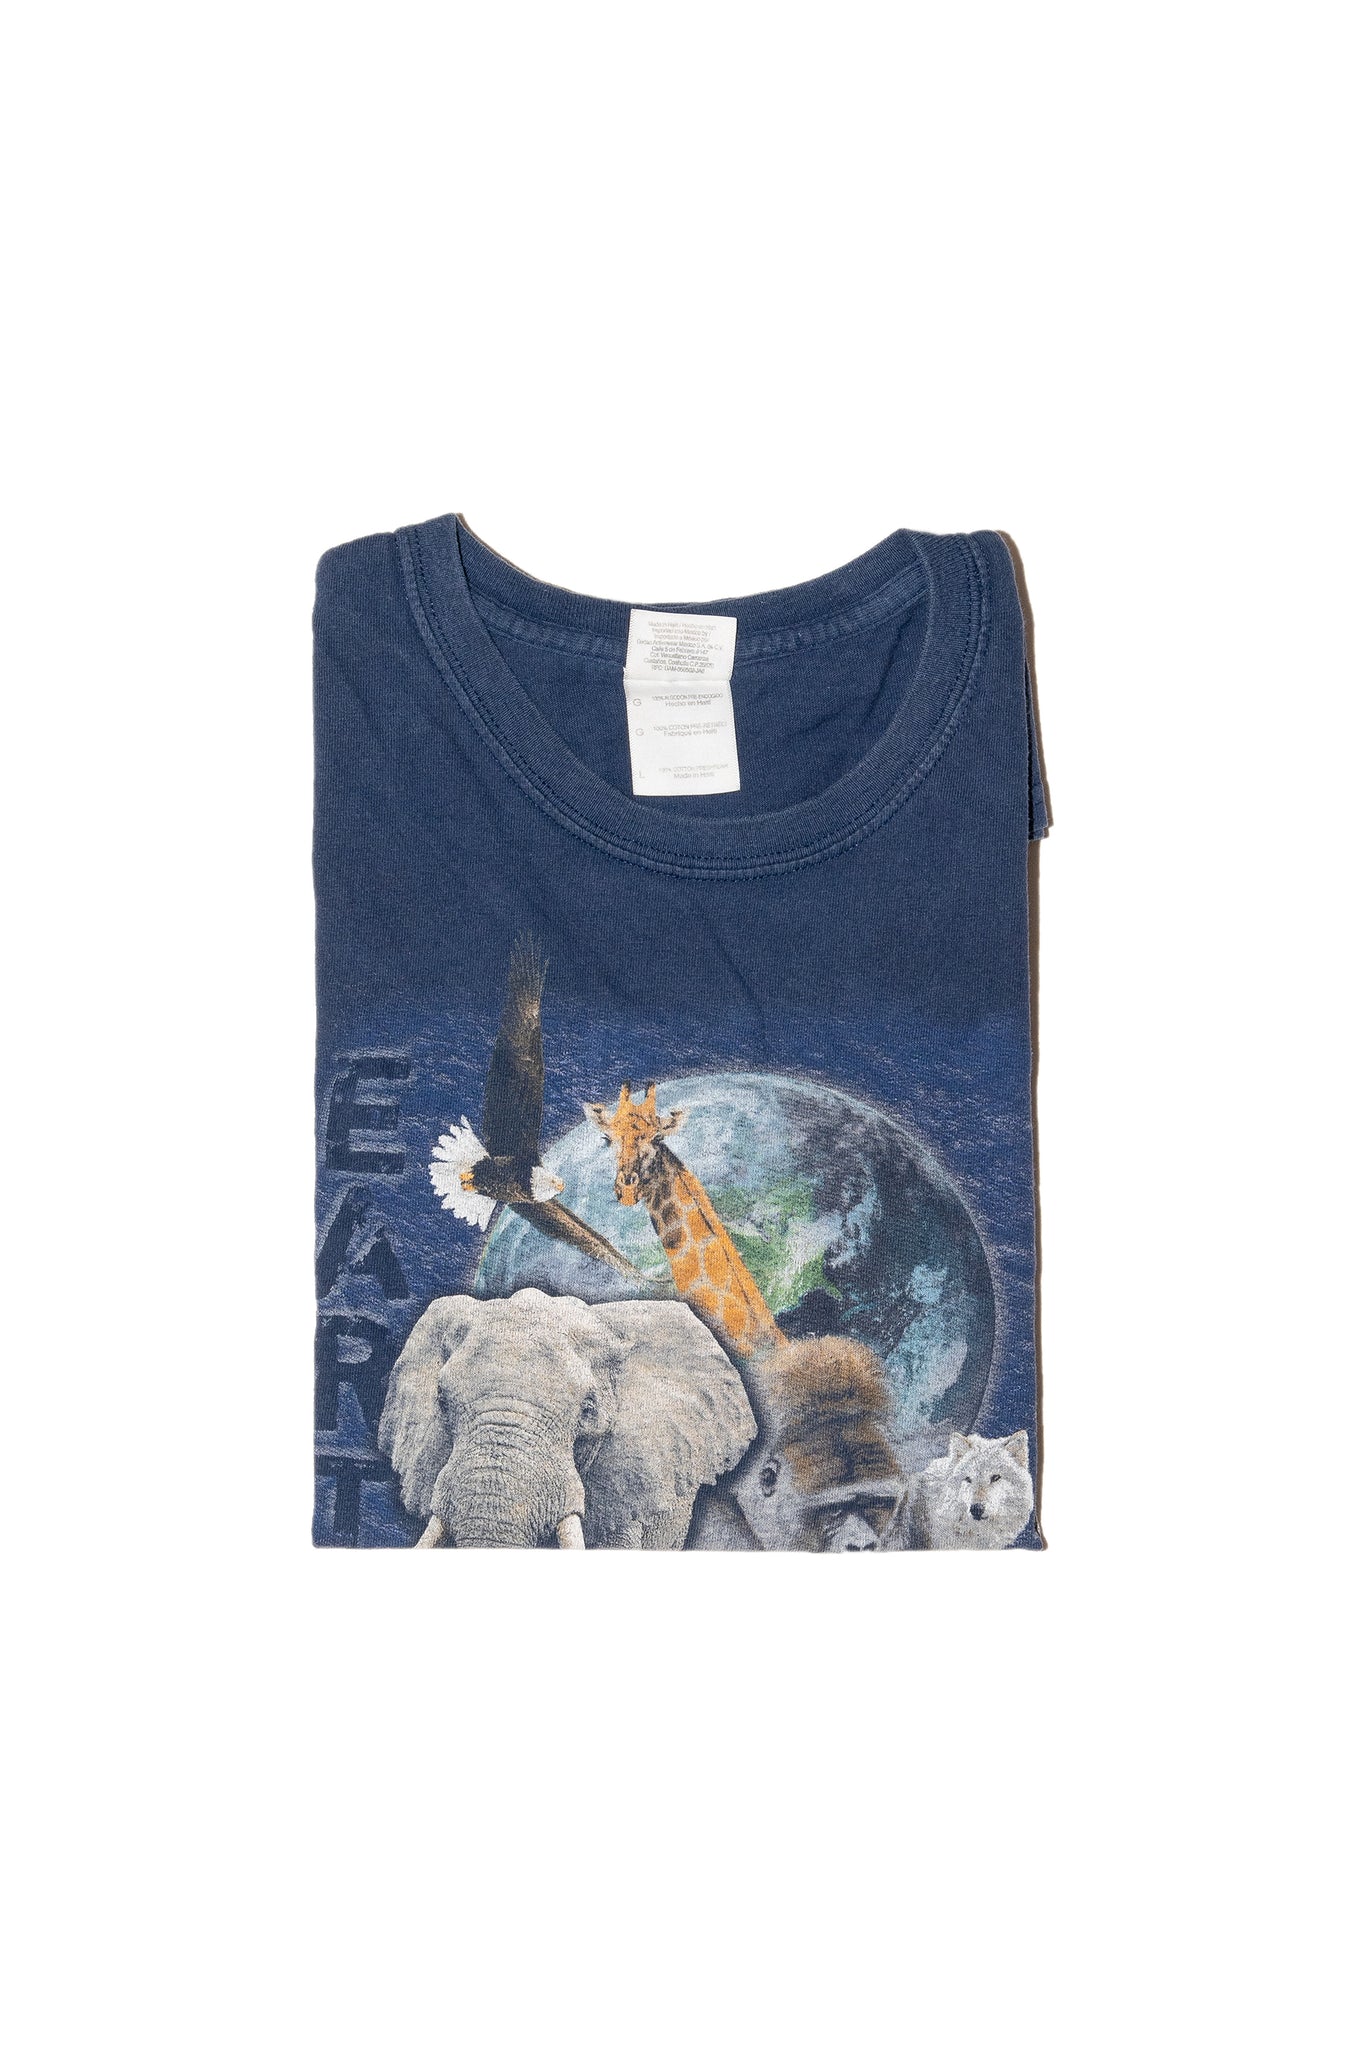 understory-shop - VINTAGE - VTG EARTH DAY ANIMALS TEE